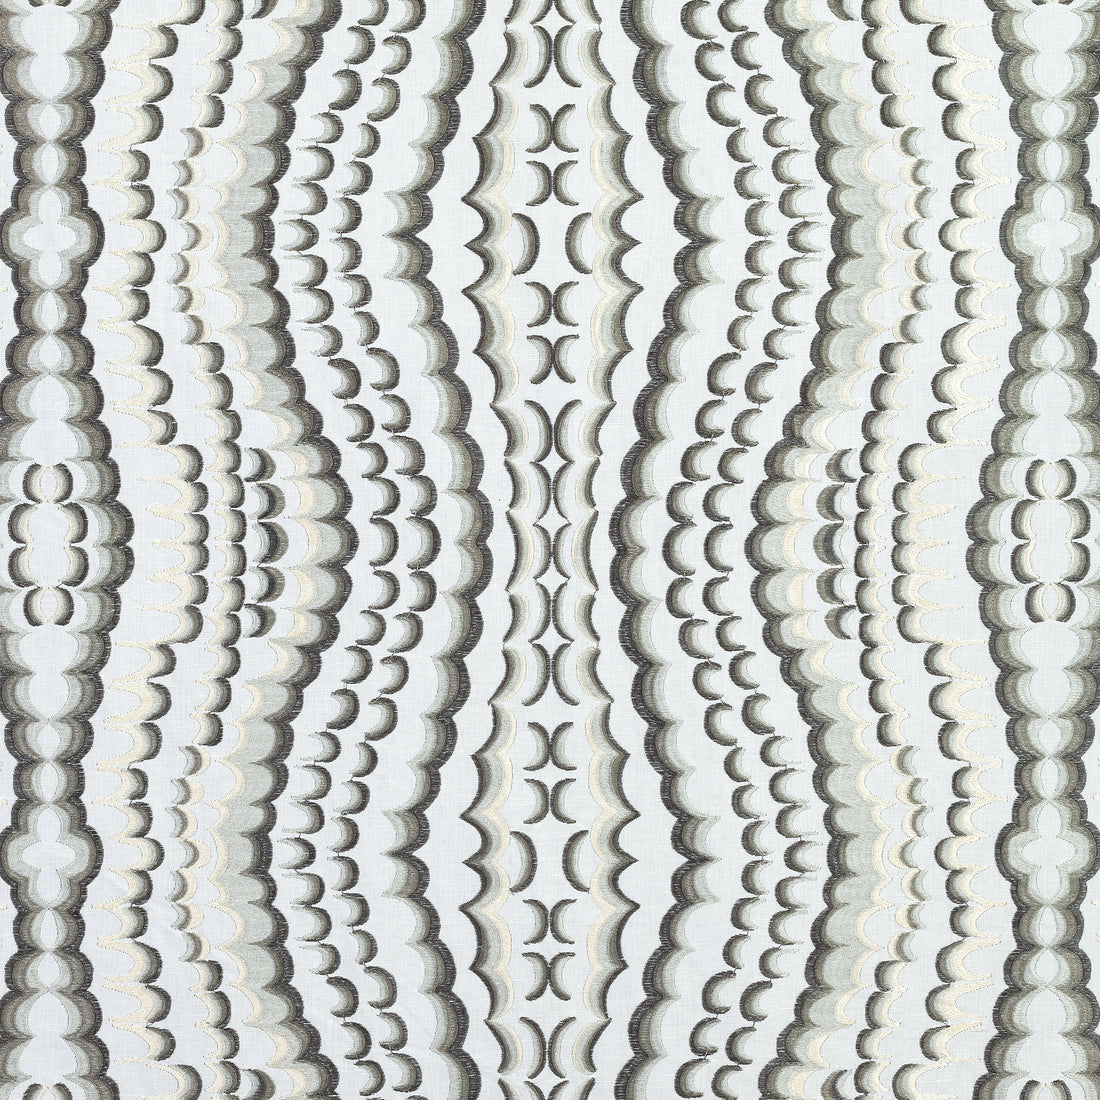 Ebru Embroidery fabric in grey color - pattern number W72981 - by Thibaut in the Paramount collection